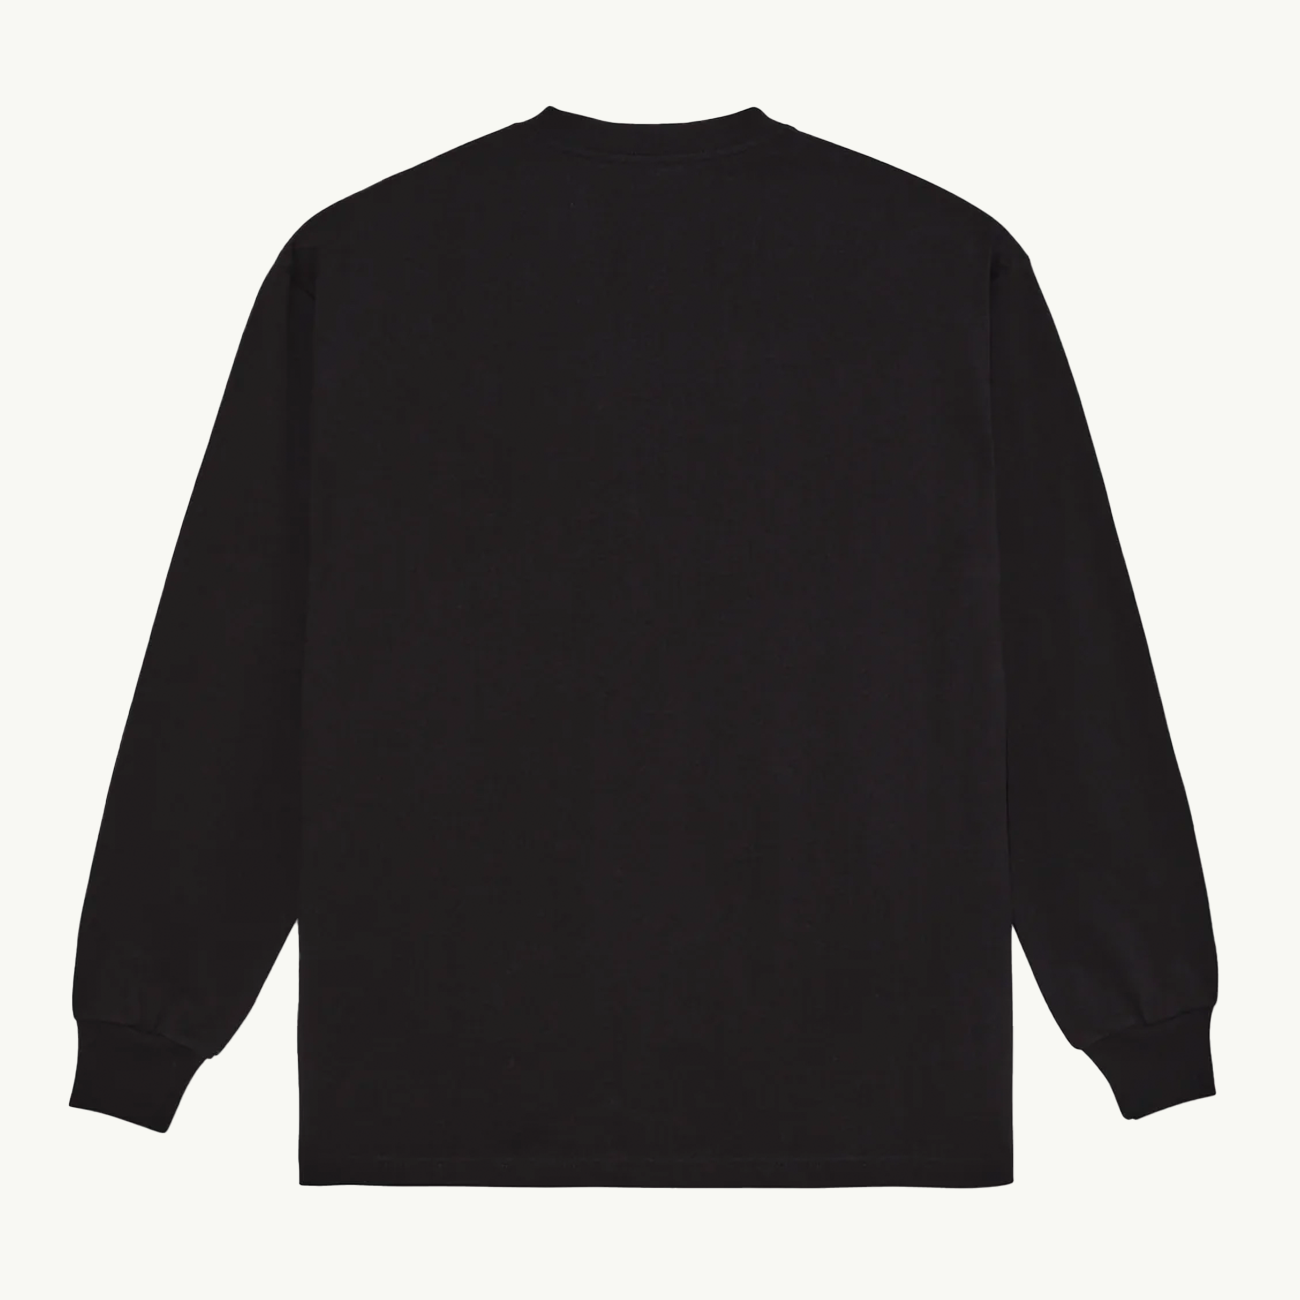 Safety On Board LS Tee - Black